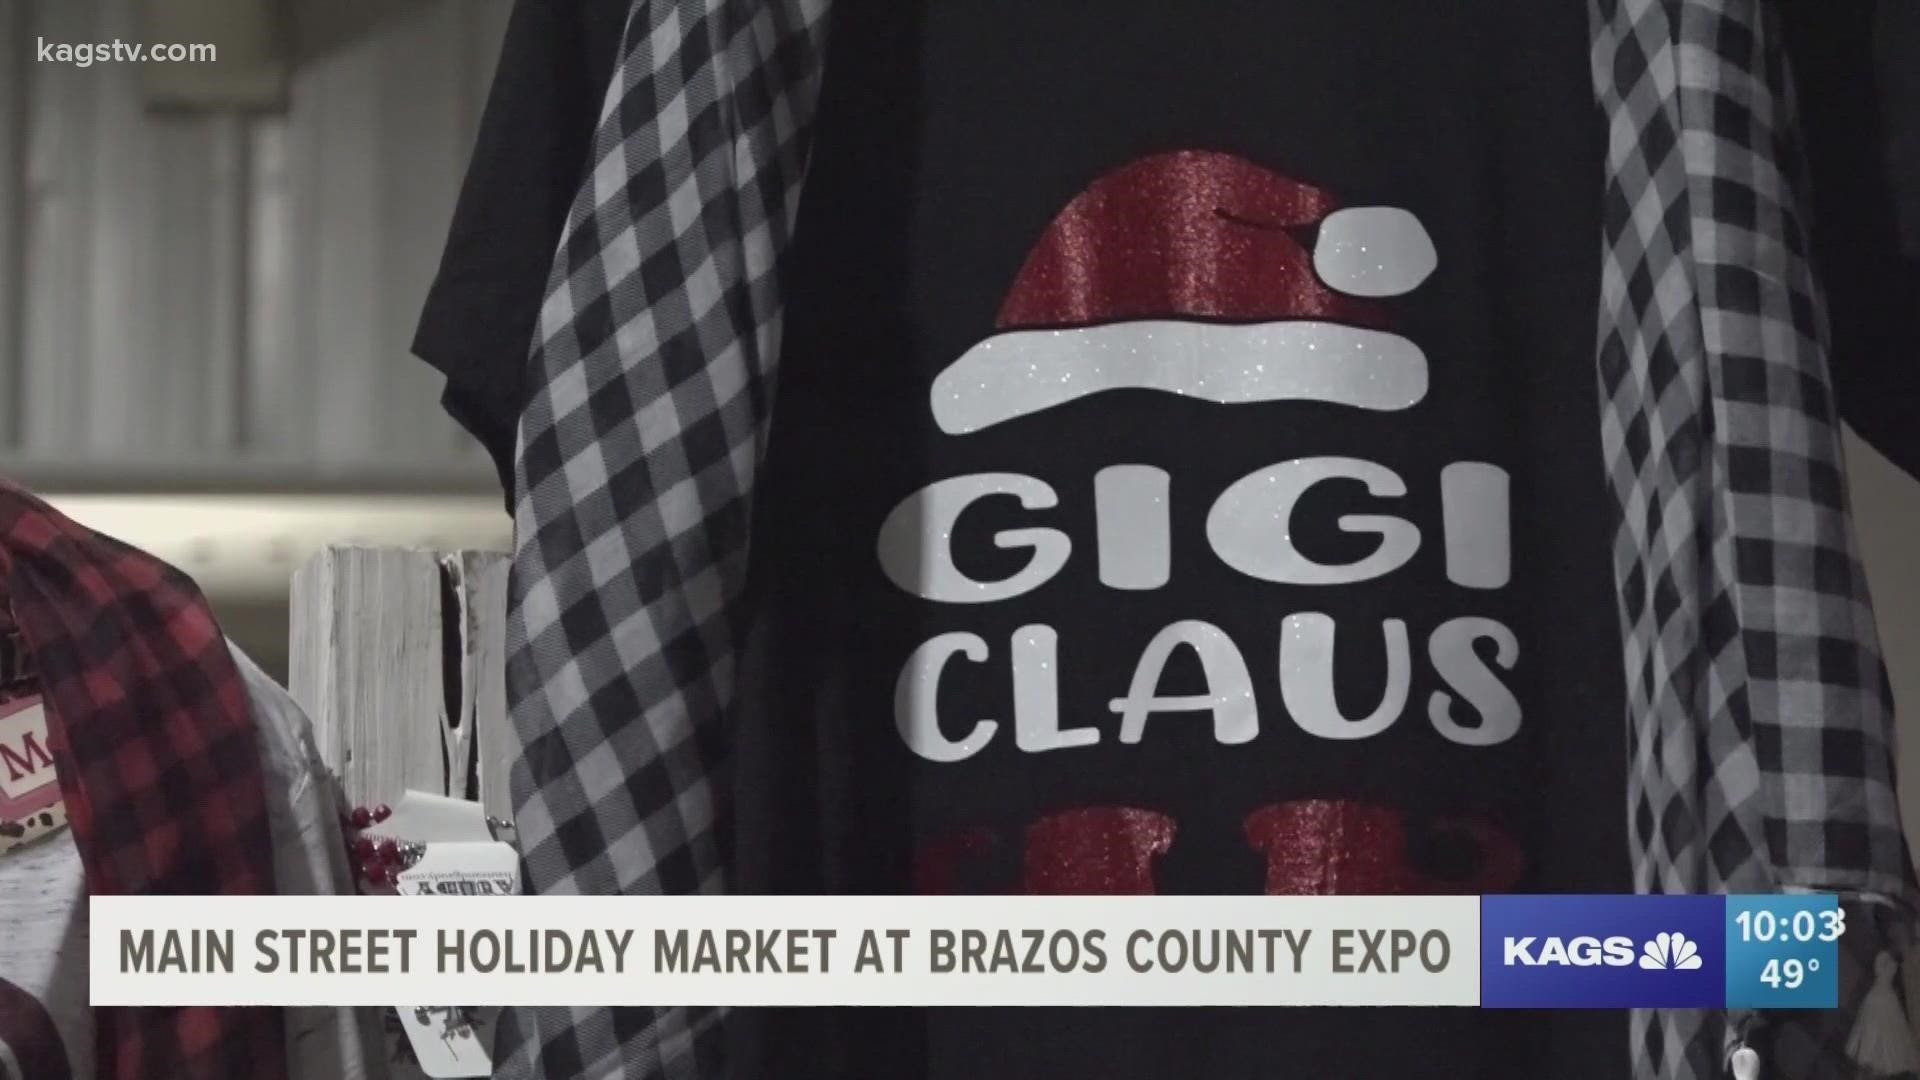 The event will be held in the Brazos County Expo Center starting Nov. 20